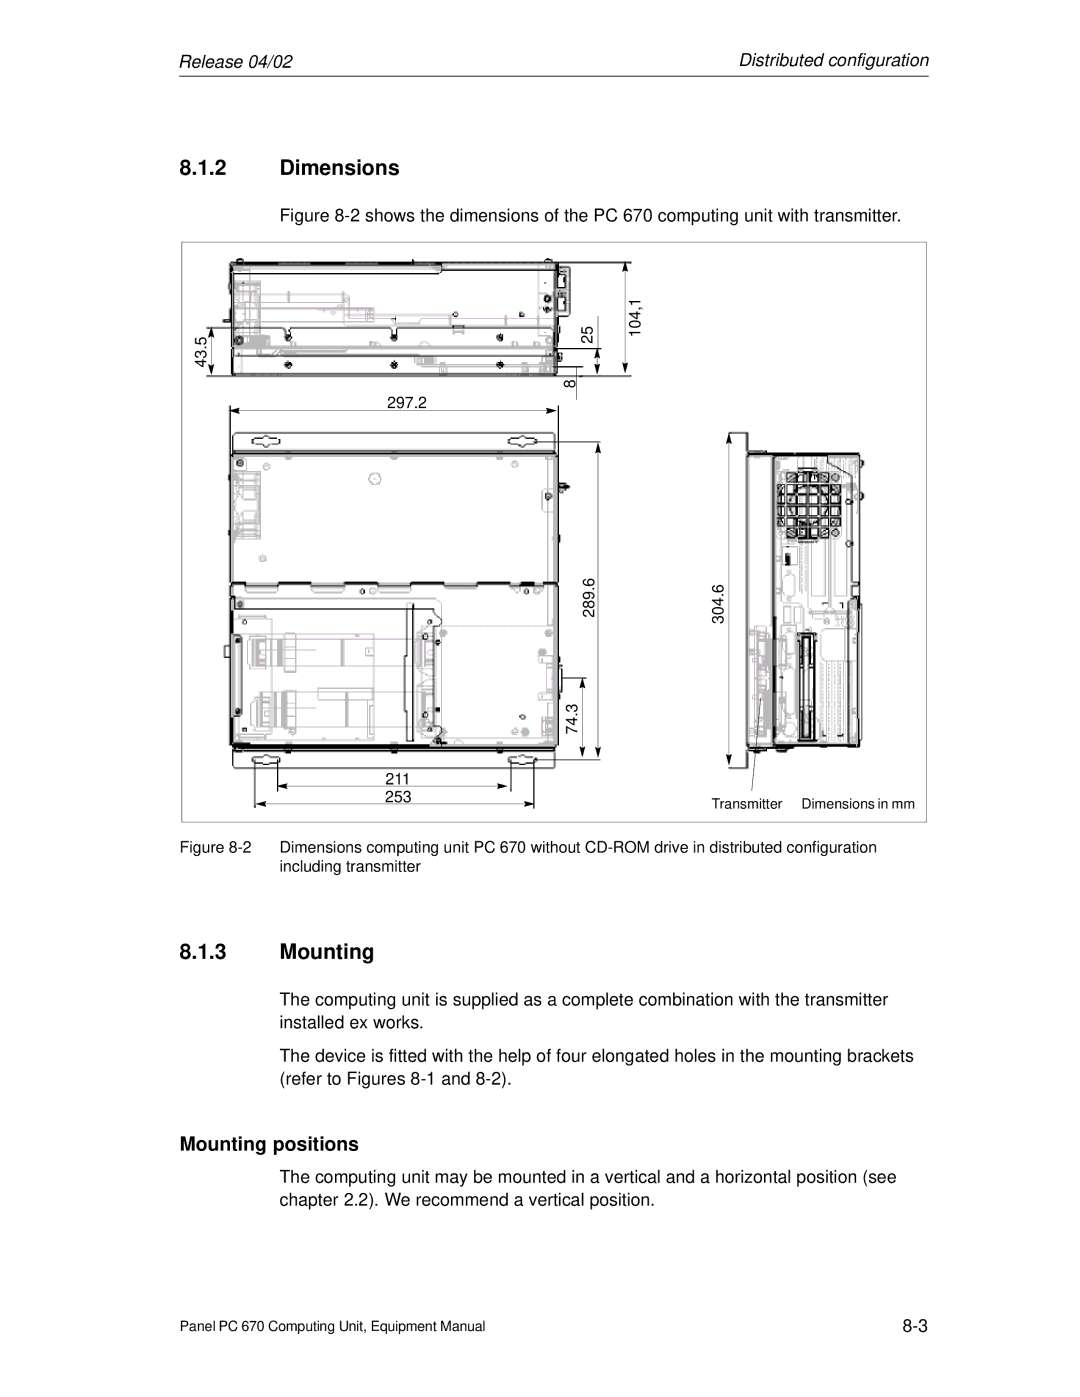 Siemens PC 670 manual Dimensions, Mounting positions 